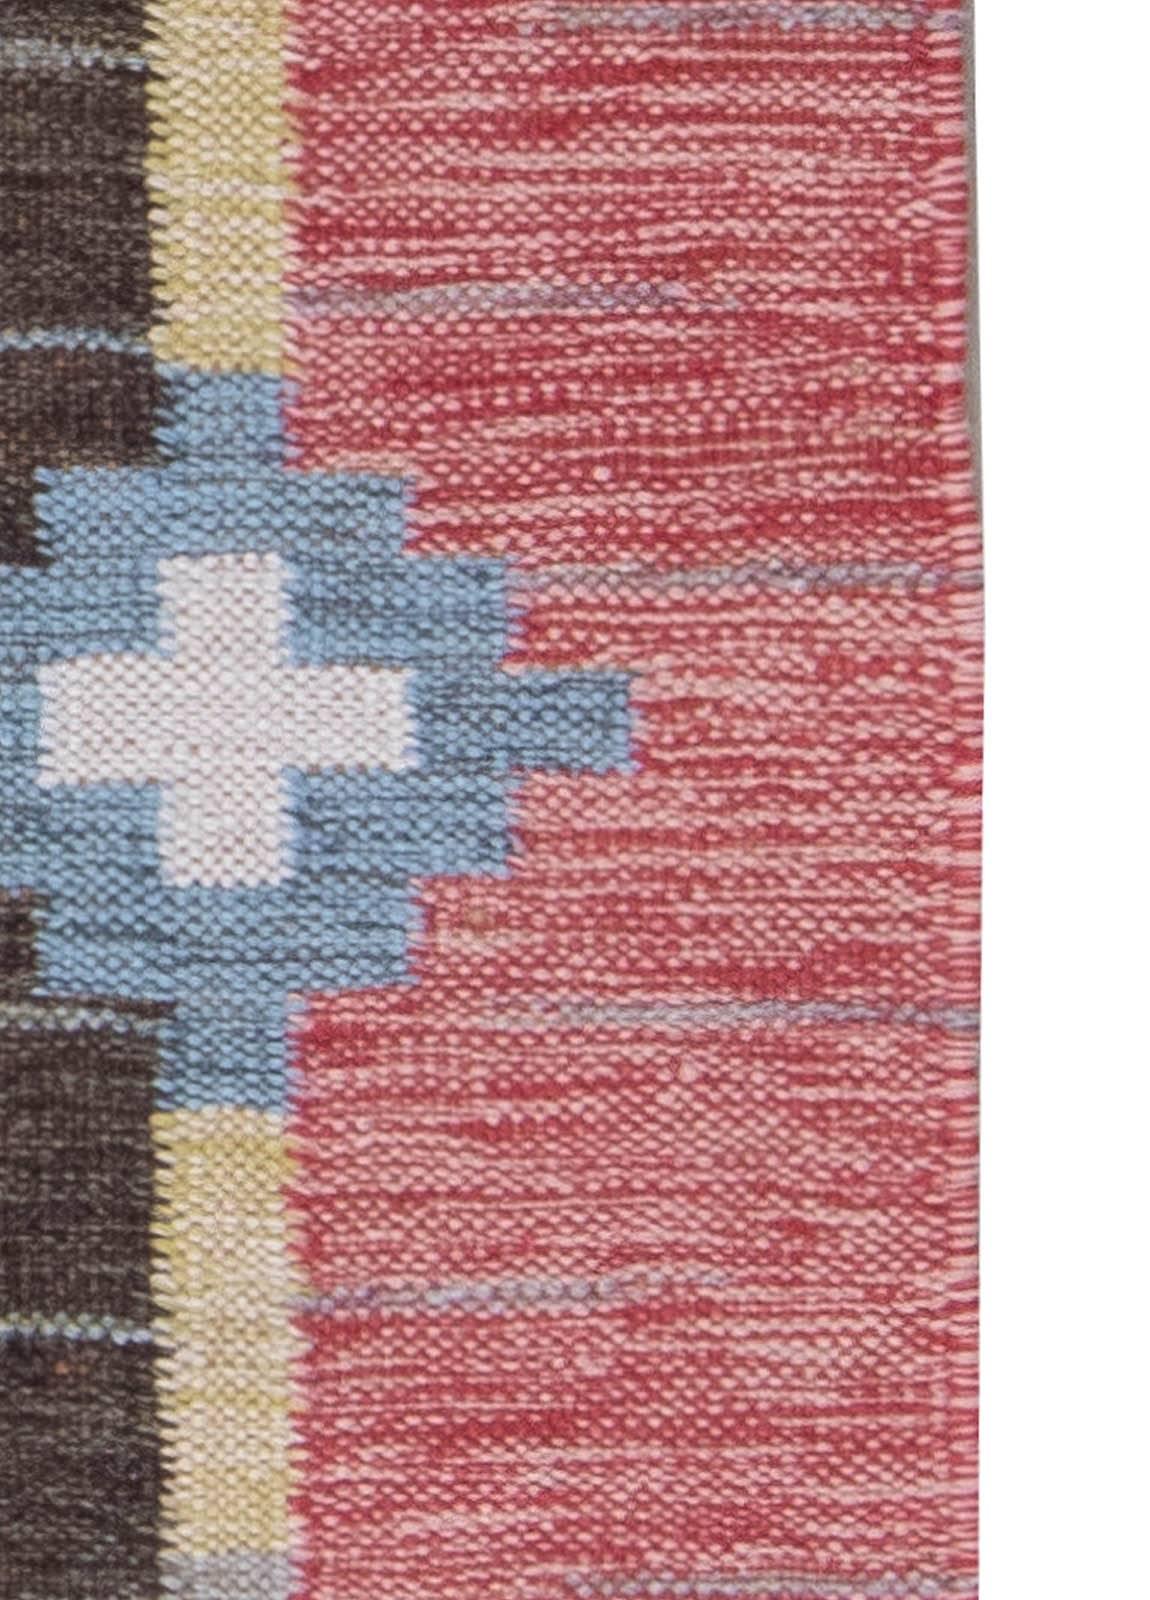 Mid-20th Century Swedish Flat-Weave Runner by Sverker Greuholm In Good Condition For Sale In New York, NY